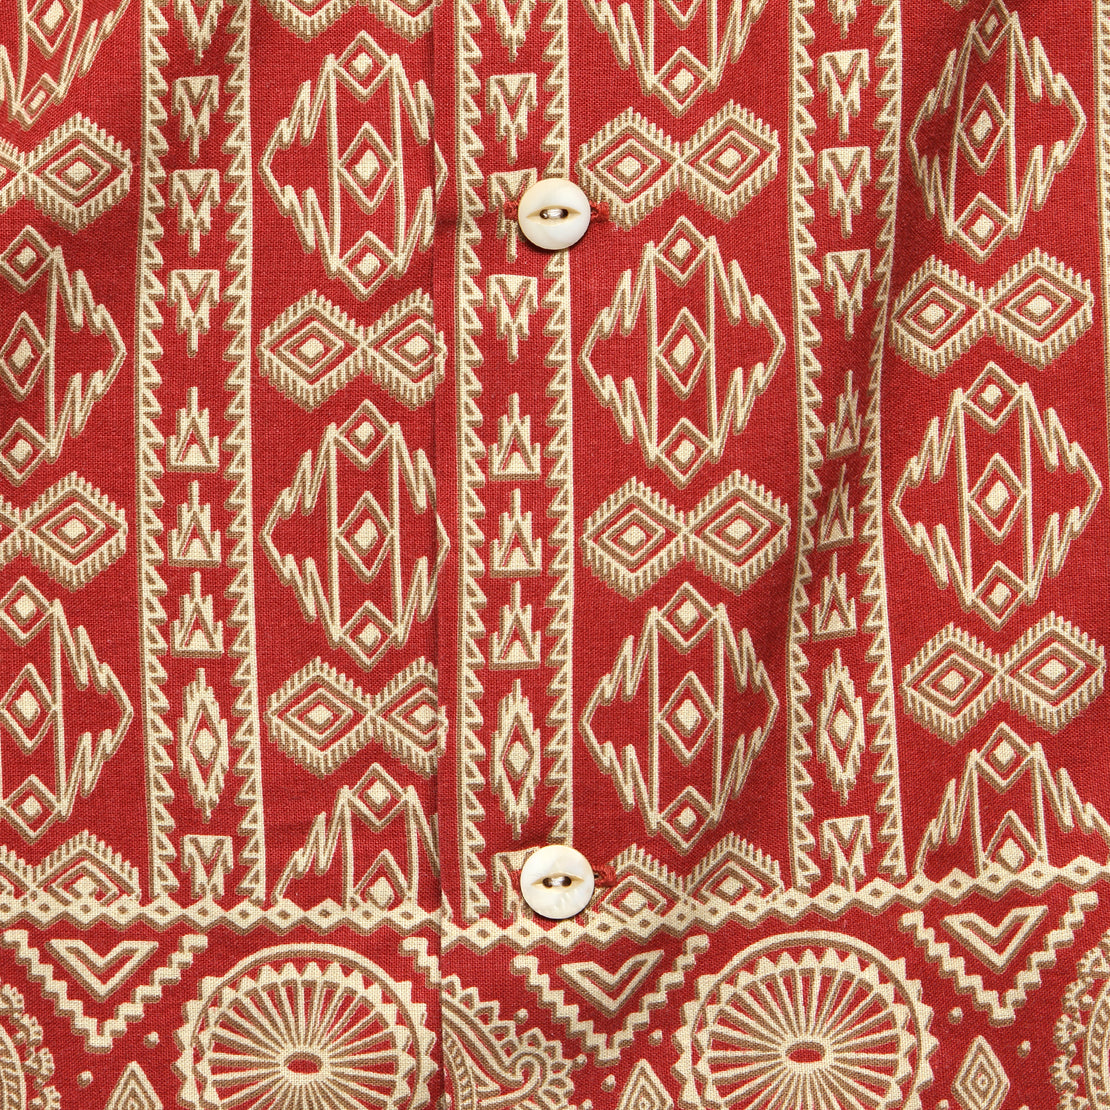 2 Pocket Camp Shirt - Red/Tan - RRL - STAG Provisions - Tops - S/S Woven - Other Pattern